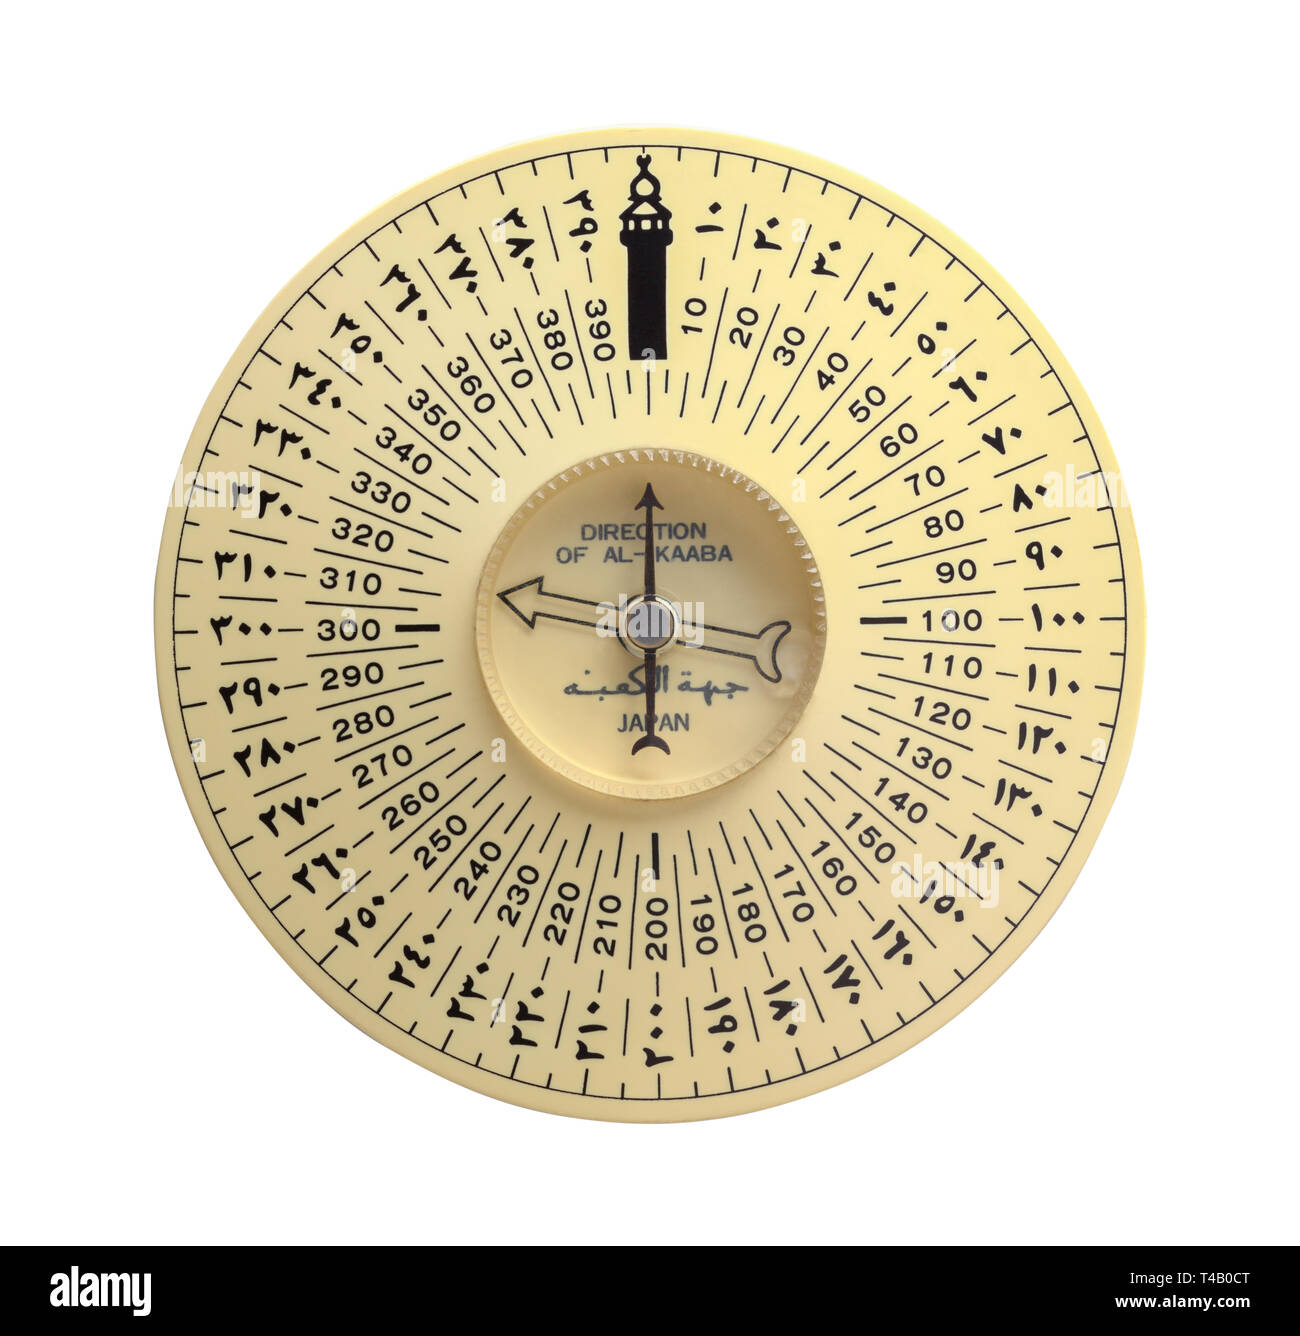 Al Kaaba Compass Isolated on White Background. Stock Photo